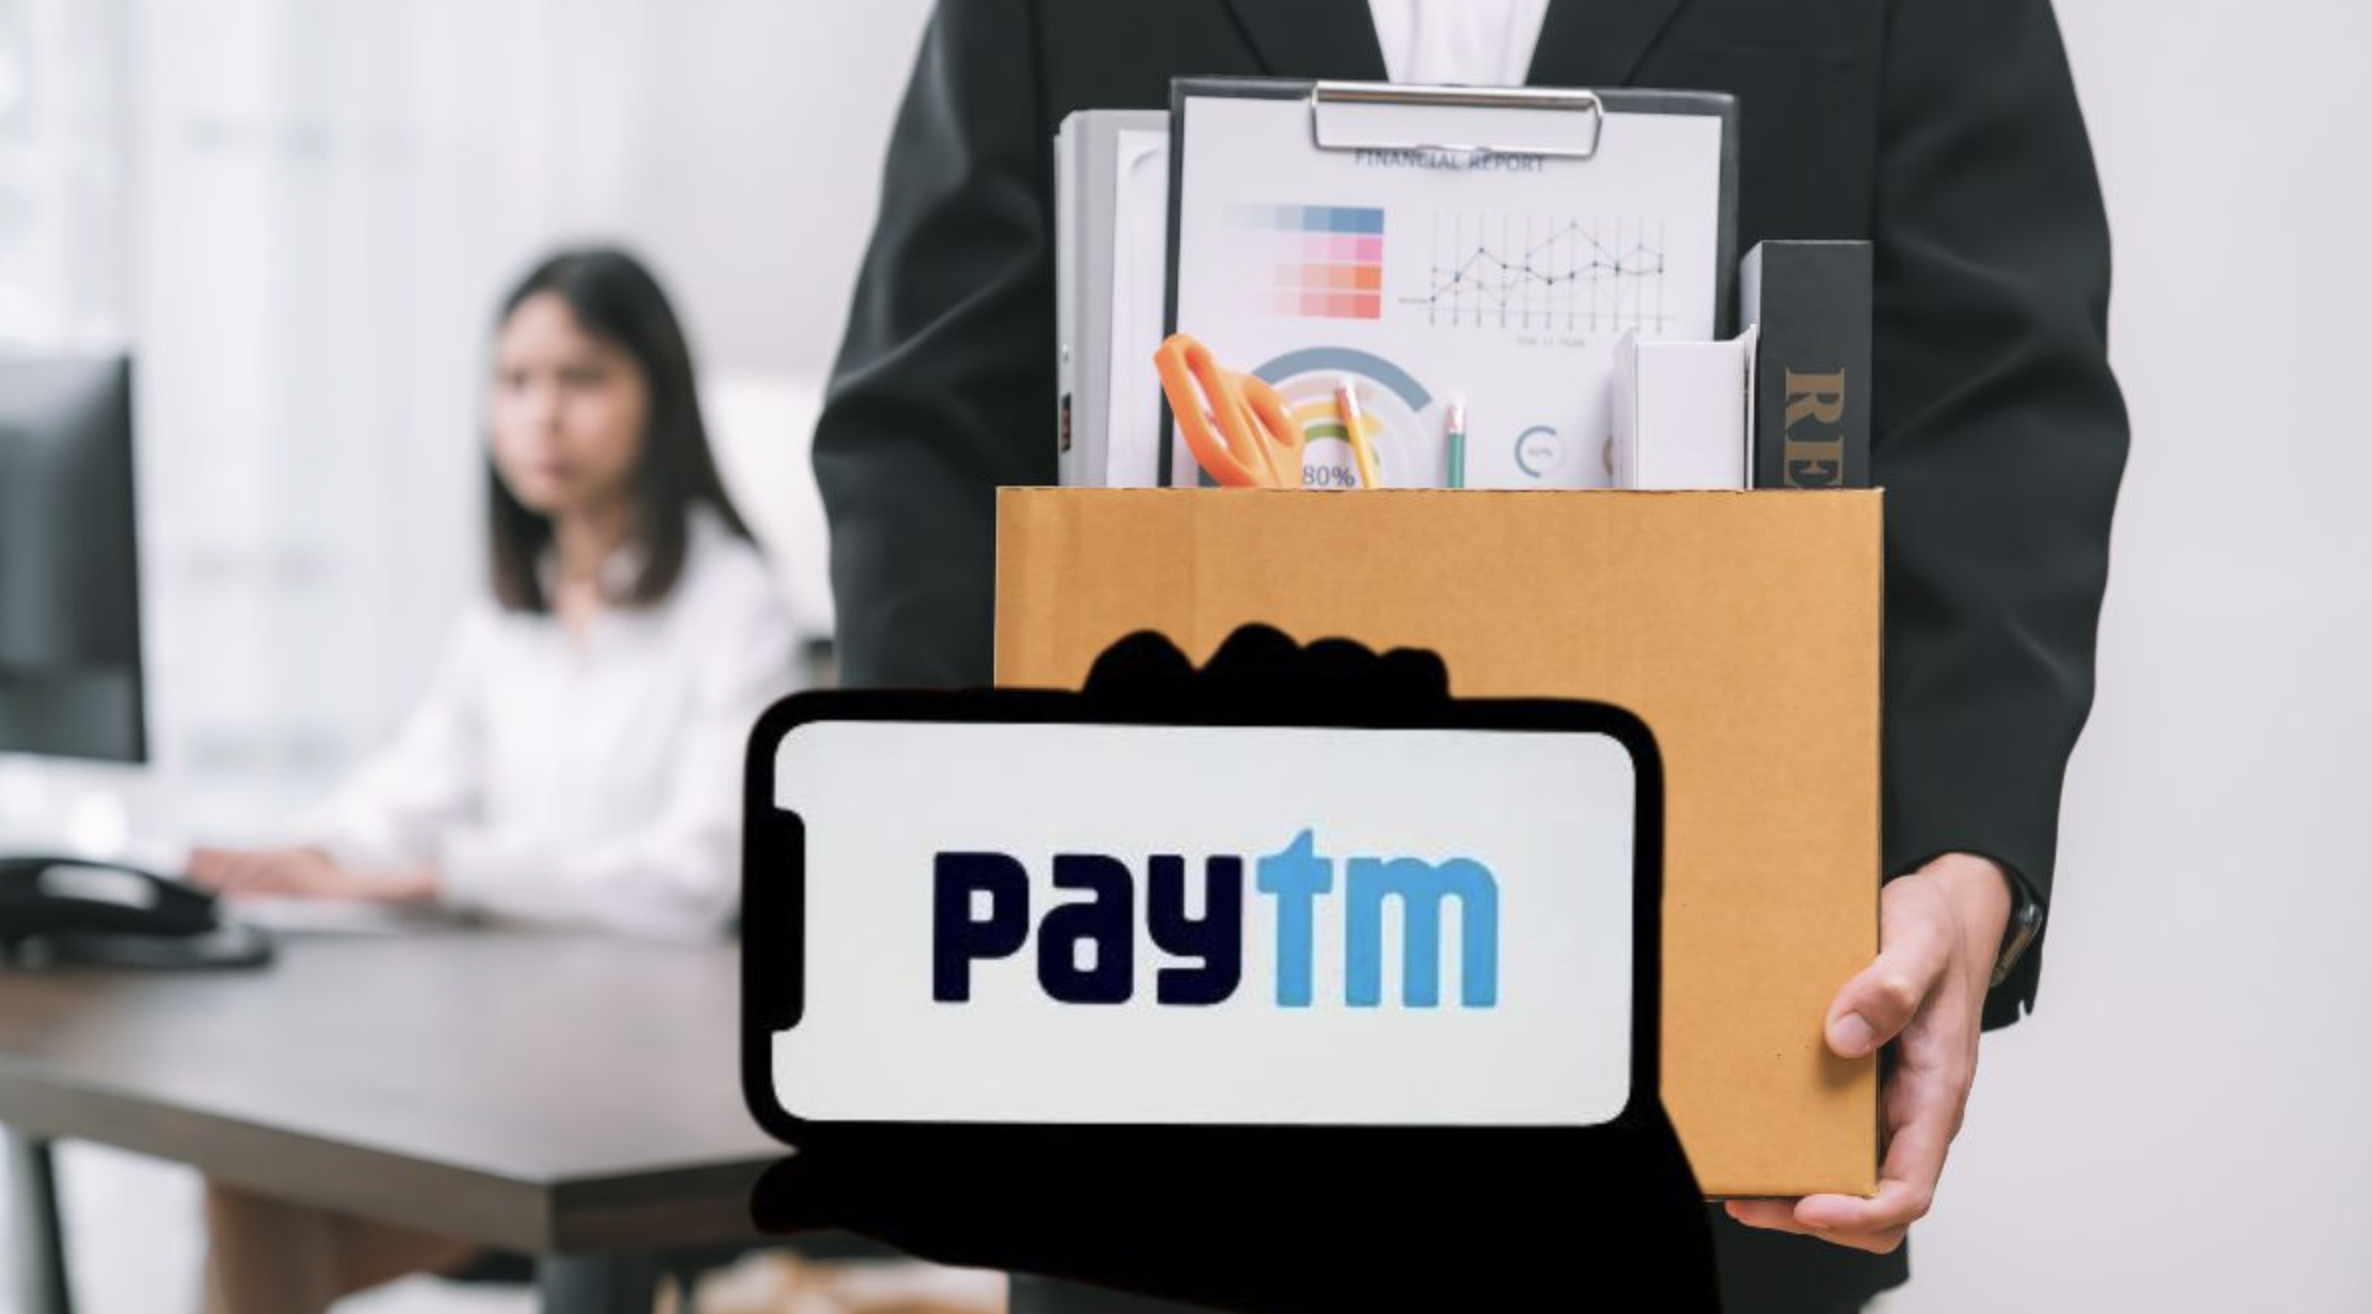 Paytm Employees File Complaint With Govt Over Unlawful Firing